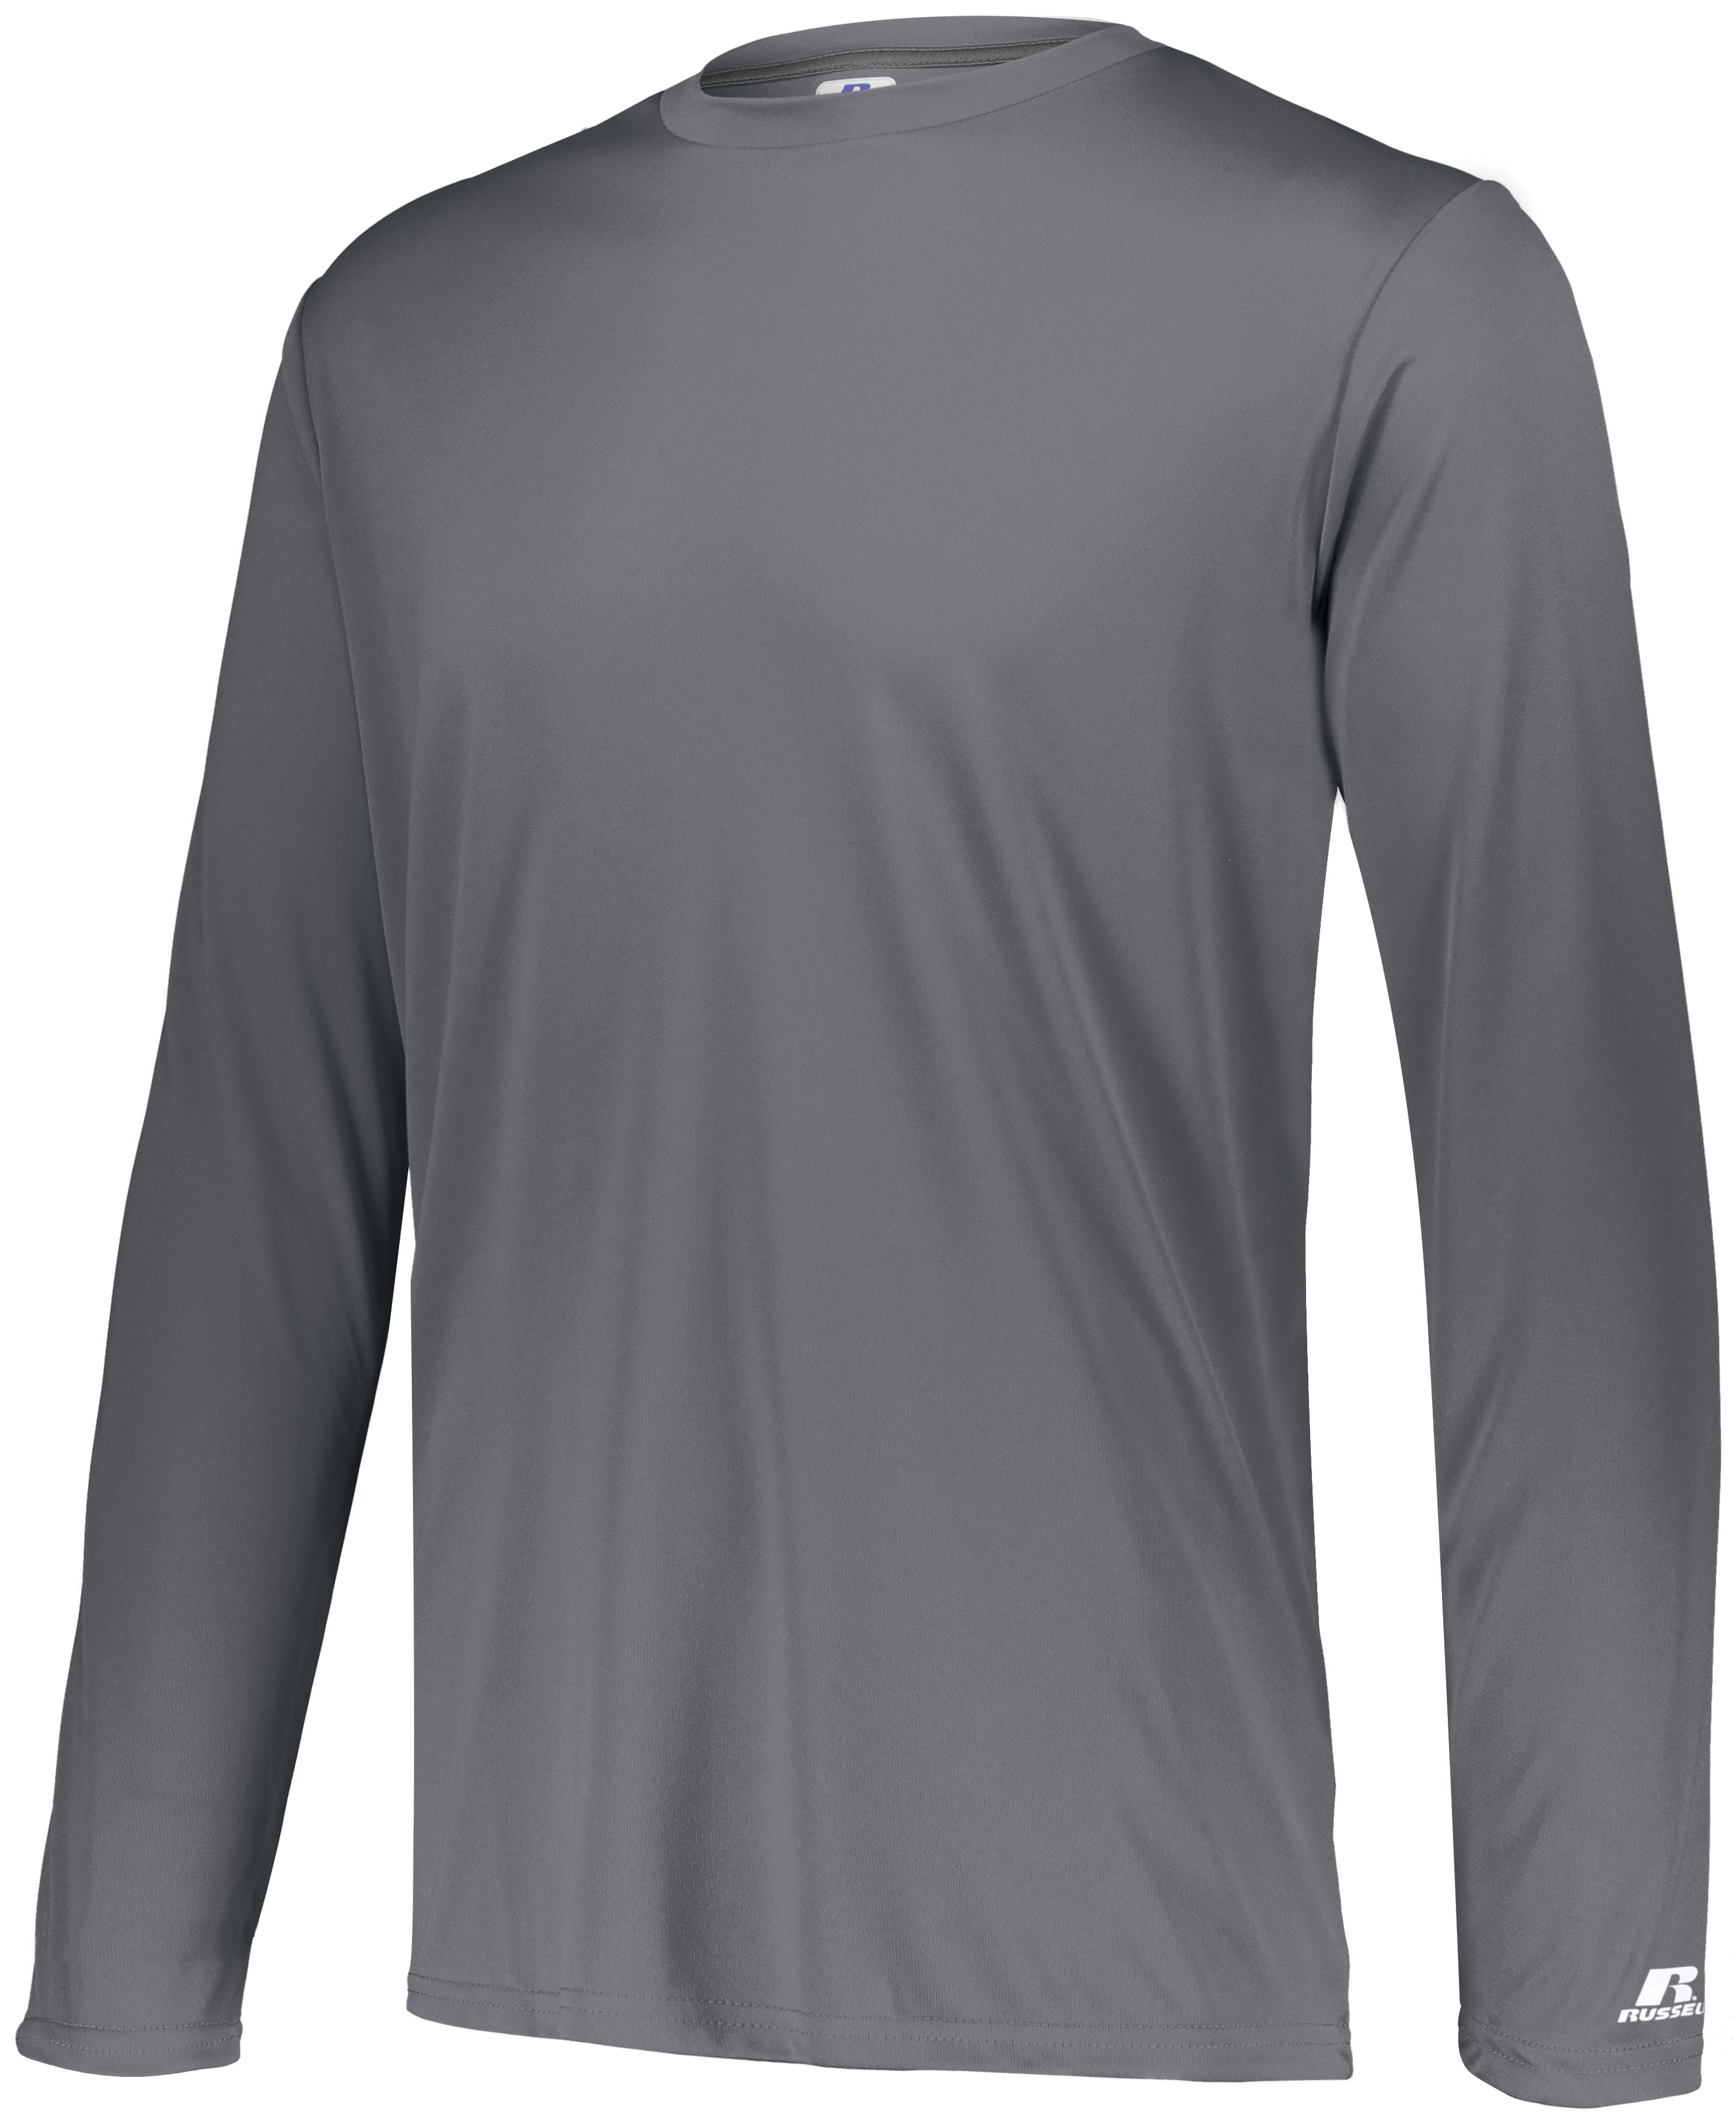 Russell Athletic Dri-Power Core Performance Long Sleeve Tee in Steel  -Part of the Adult, Adult-Tee-Shirt, T-Shirts, Russell-Athletic-Products, Shirts product lines at KanaleyCreations.com